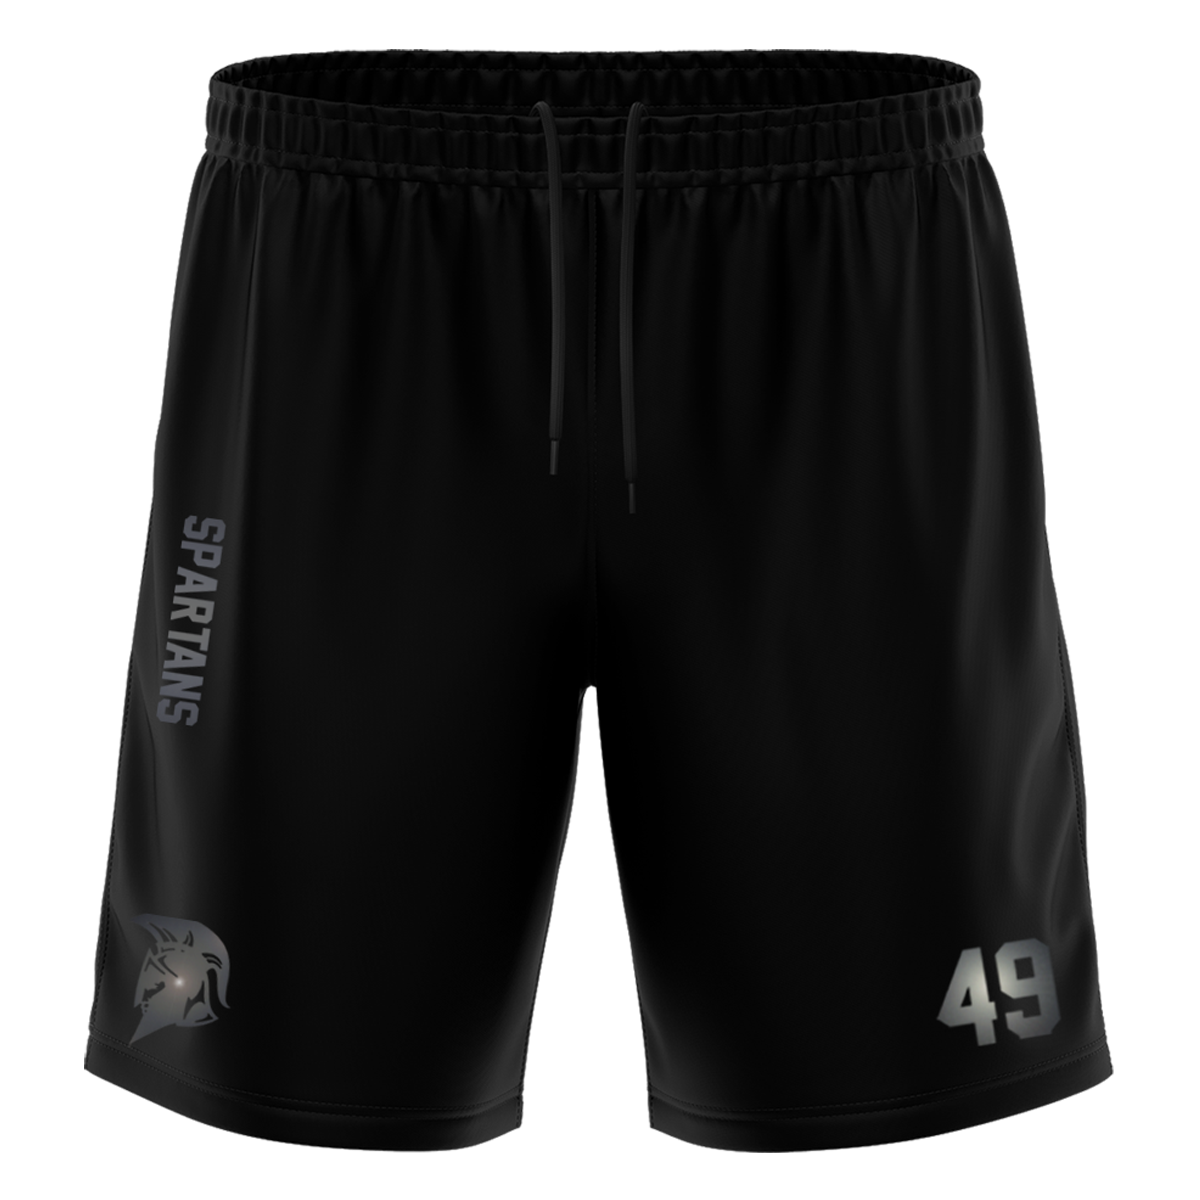 Spartans "Blackline" Training Short with Playernumber or Initials